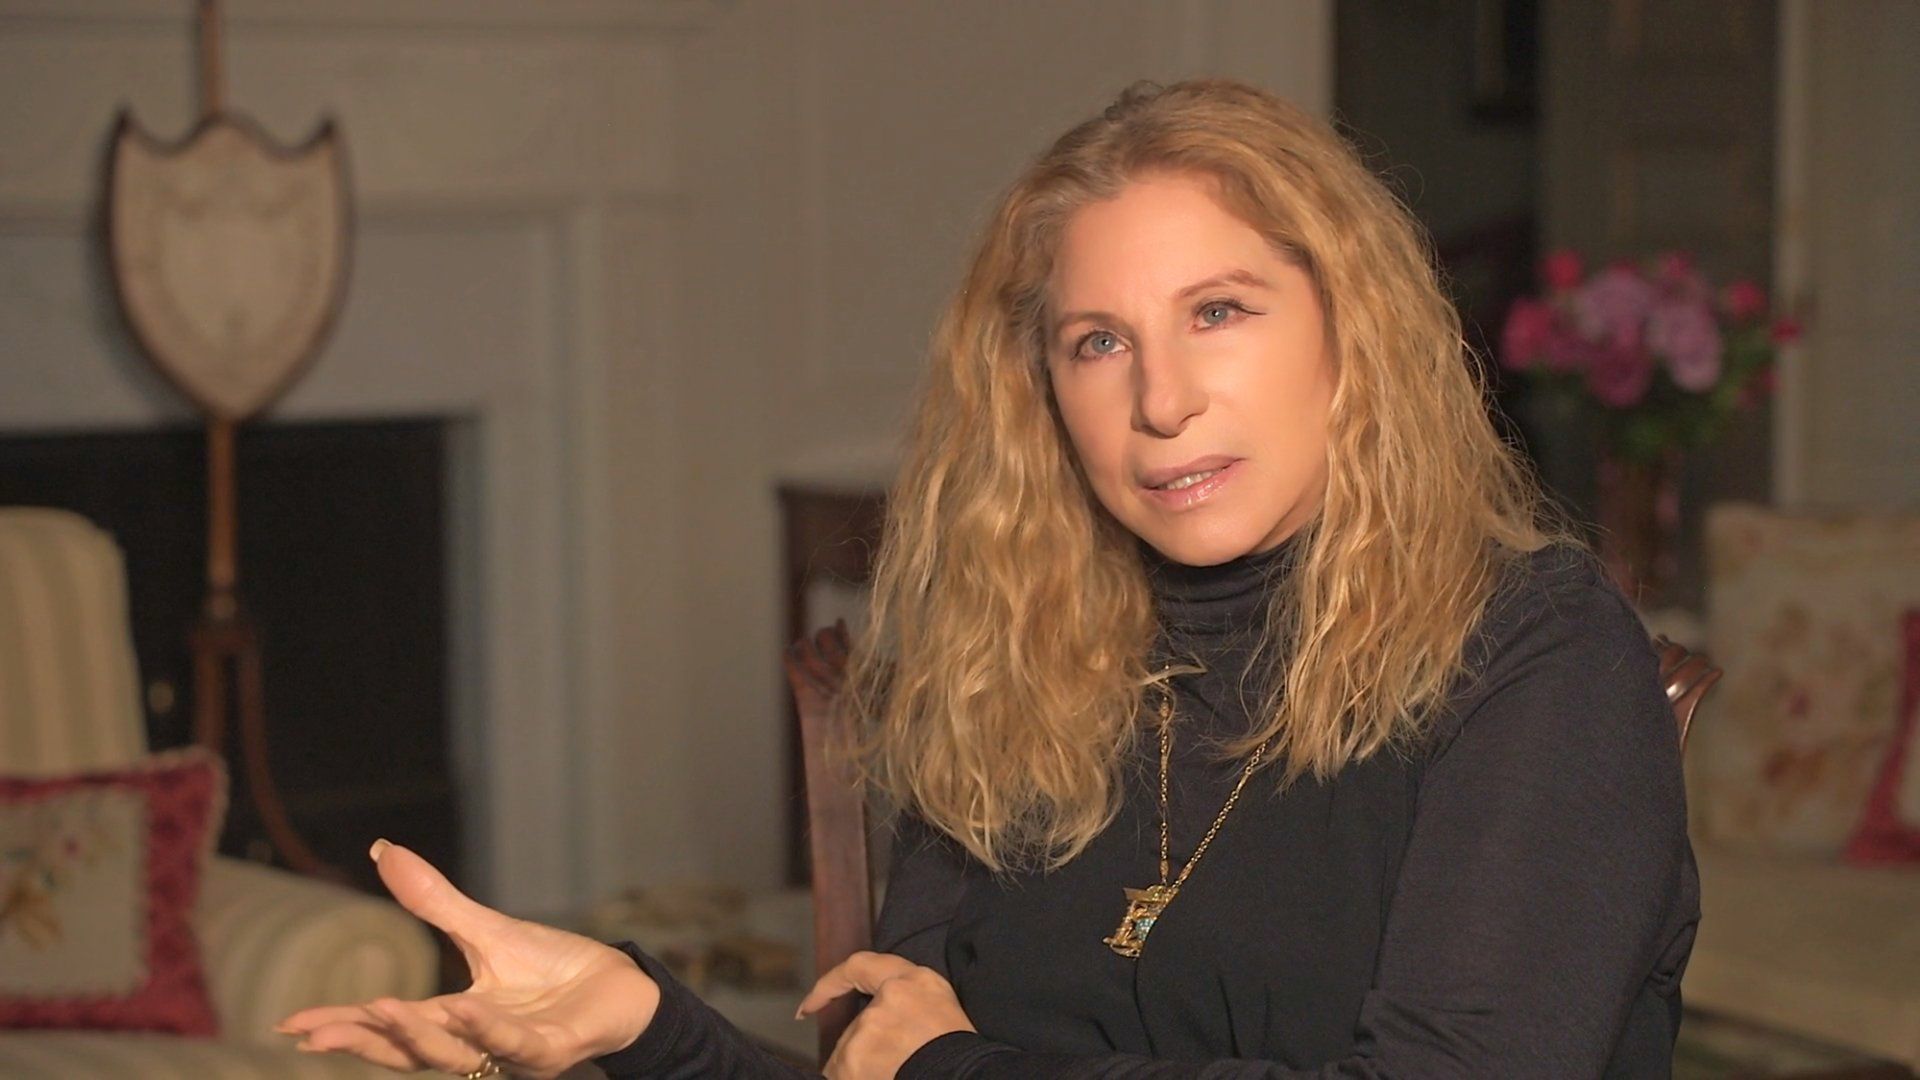 Barbra Streisand, beautifully photographed for her 2020 interview on The Criterion Channel